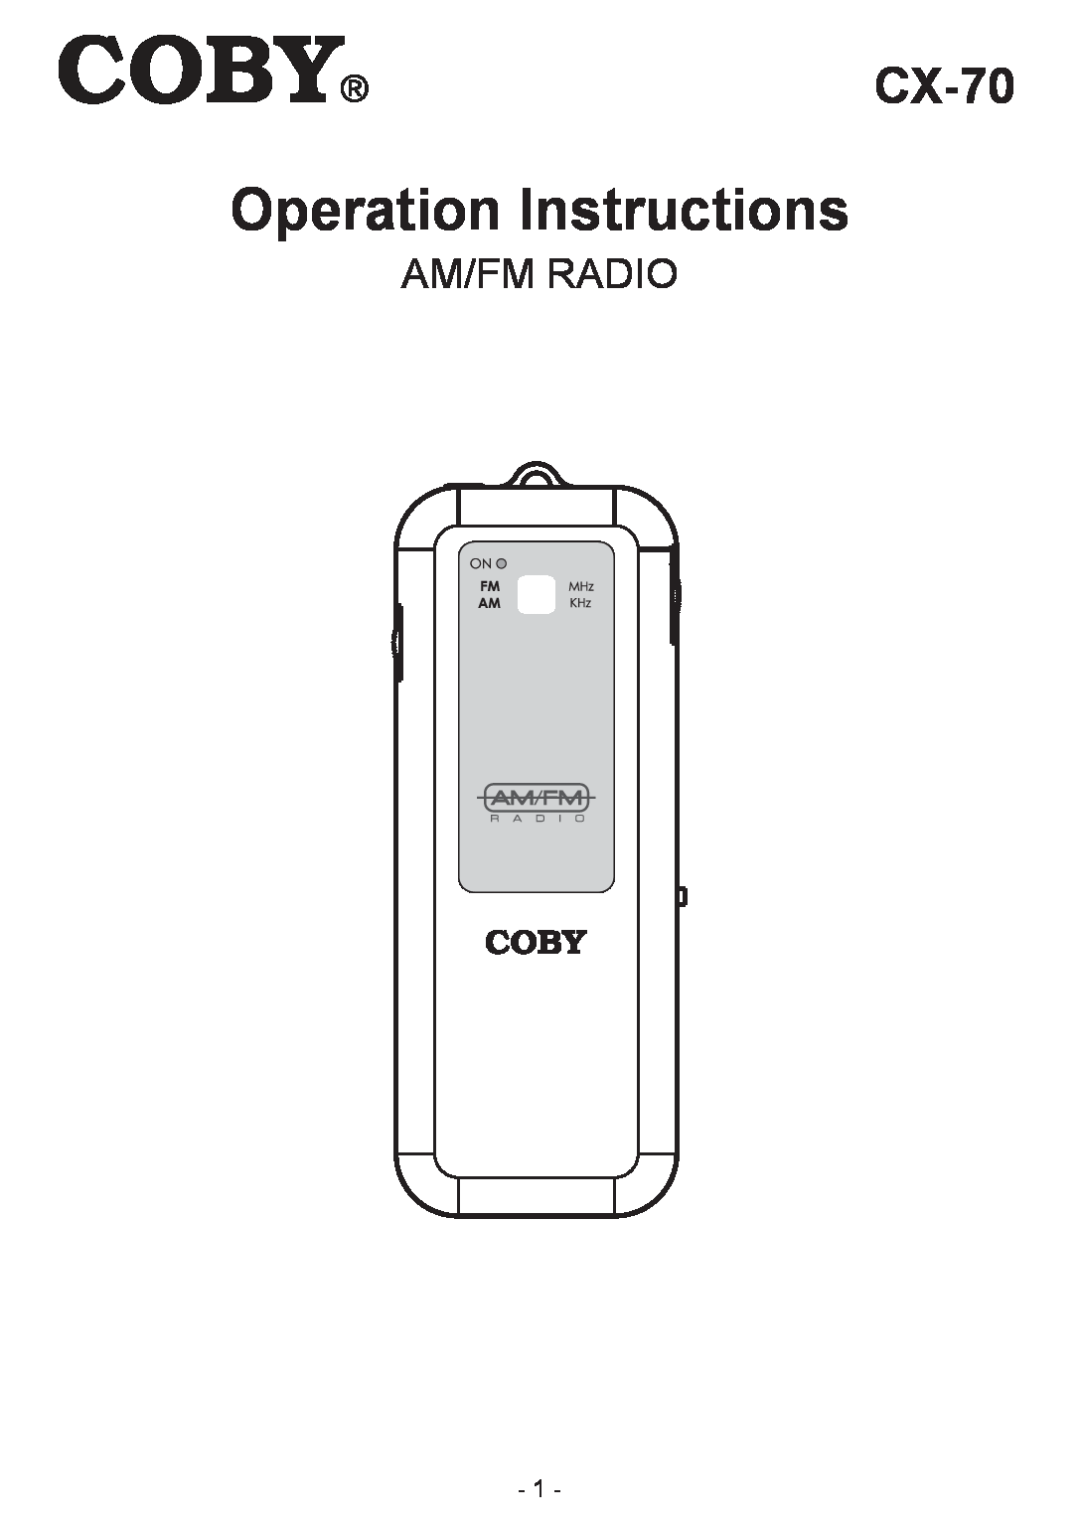 COBY electronic CX-70 manual Operation Instructions, Am/Fm Radio 